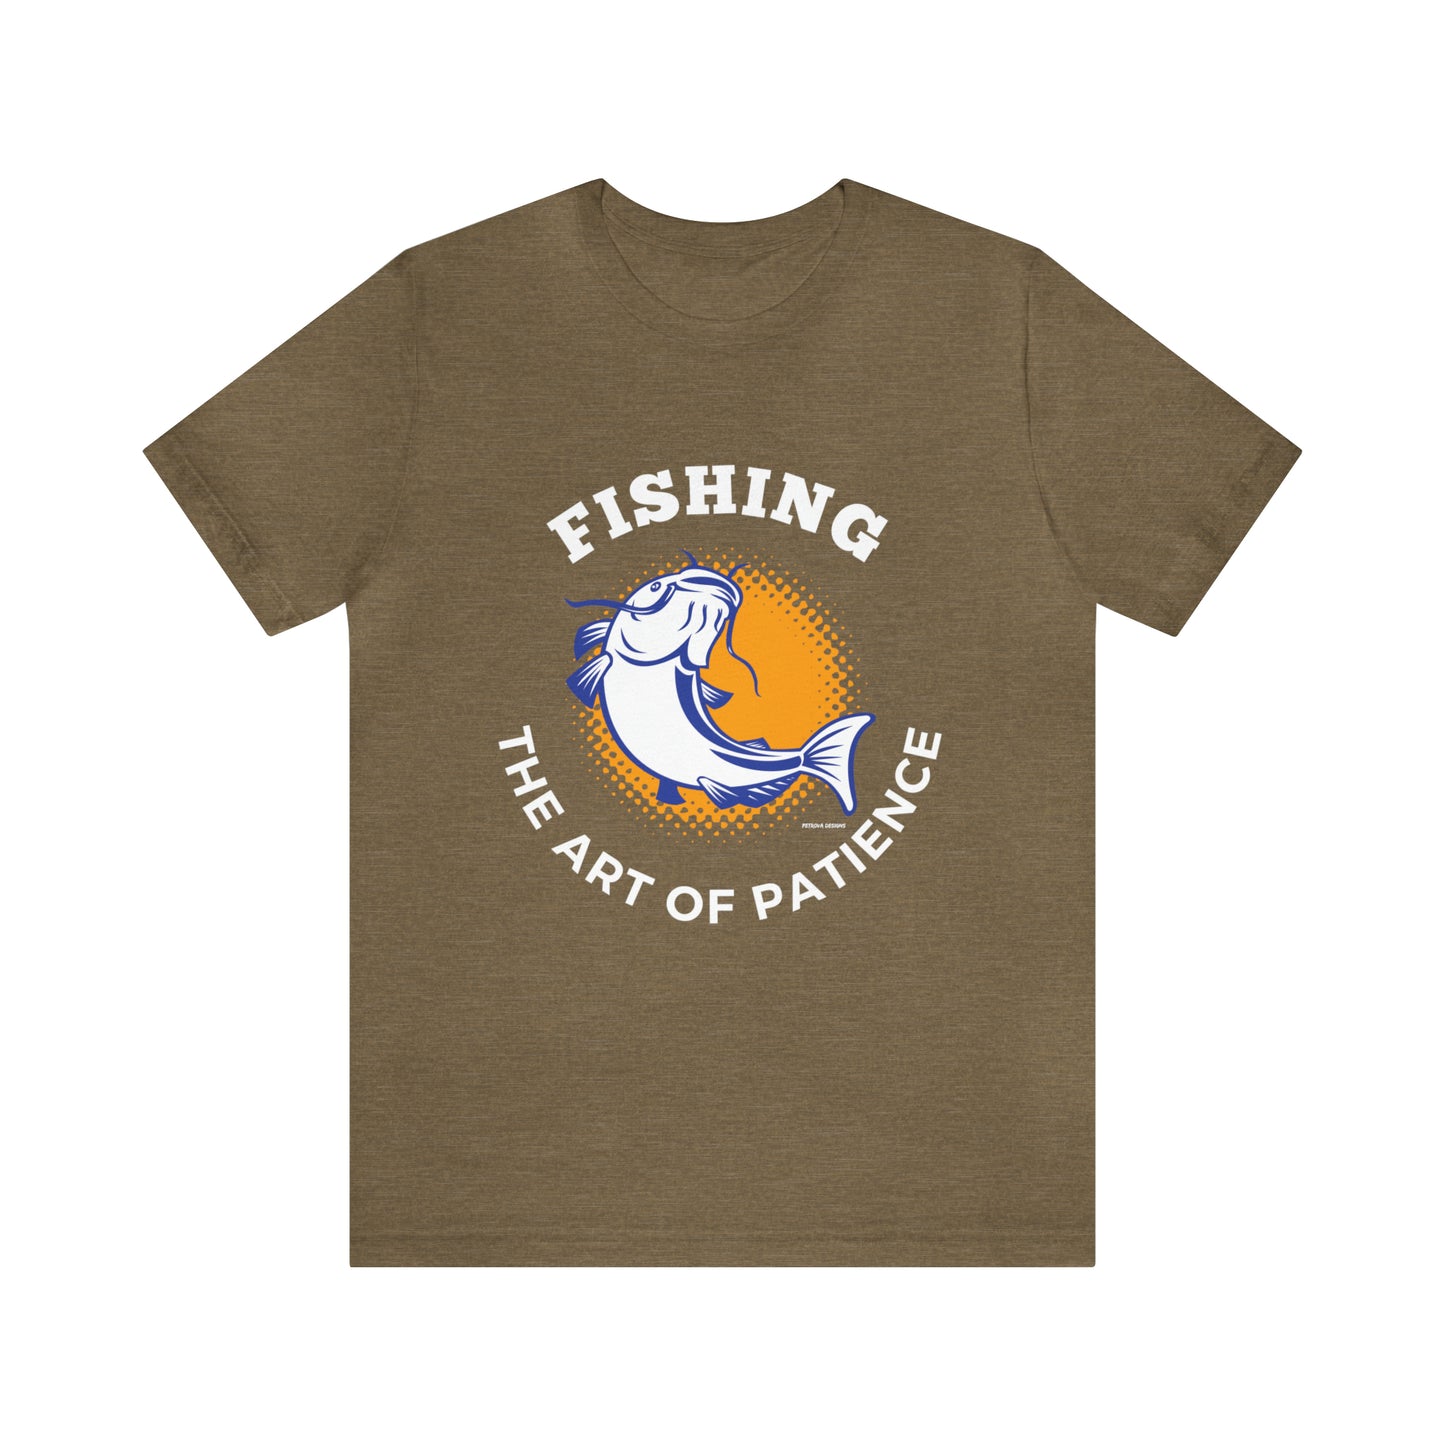 Heather Olive T-Shirt Tshirt Design Gift for Friend and Family Short Sleeved Shirt Fishing Hobby Aesthetic Petrova Designs